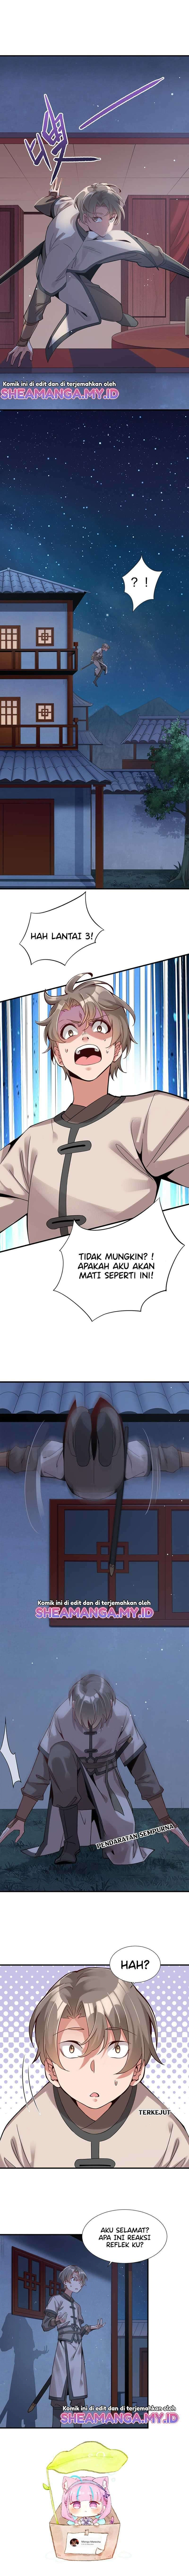 Baca After The Friendship Full (100% Cleared Harem Route / Make The Level Up To Max) Chapter 1.2  - GudangKomik